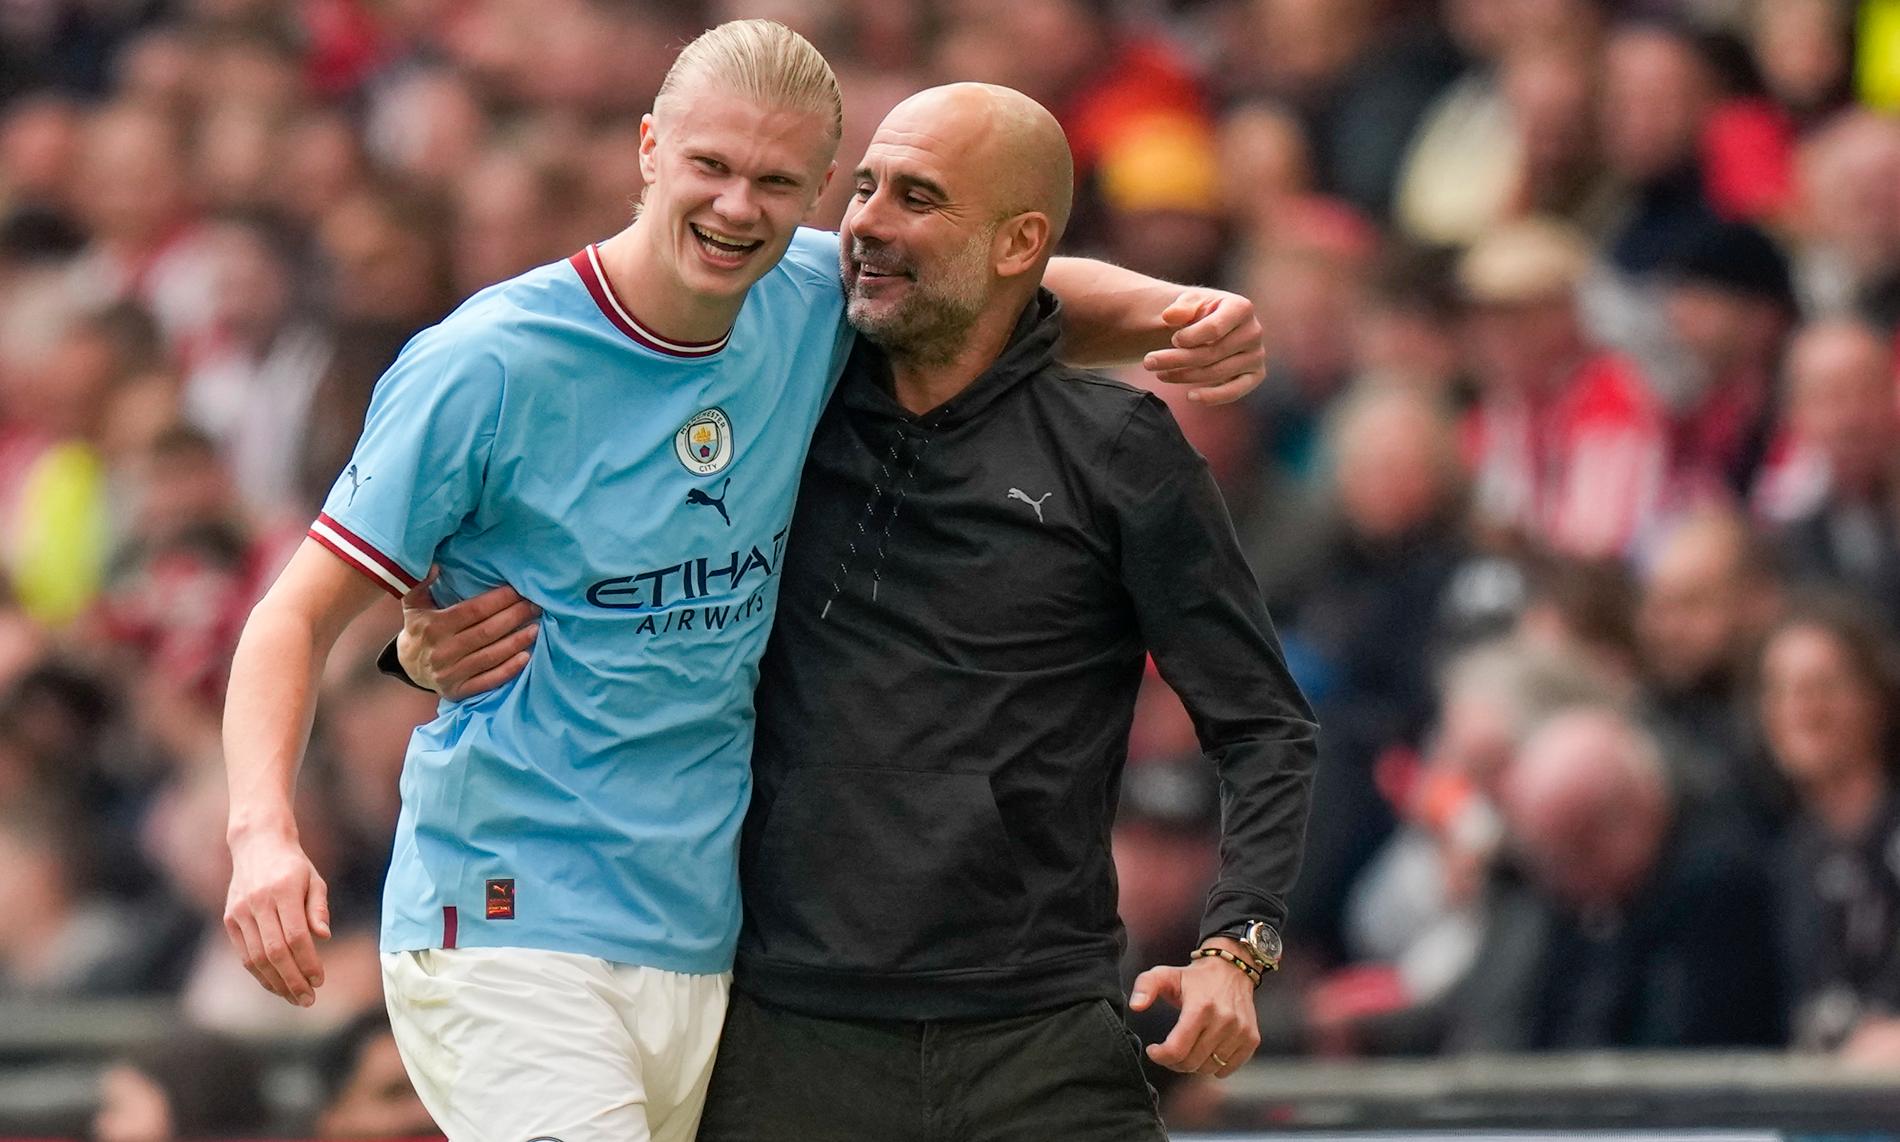 Guardiola on Haaland’s confidence: – The greatest value you can have